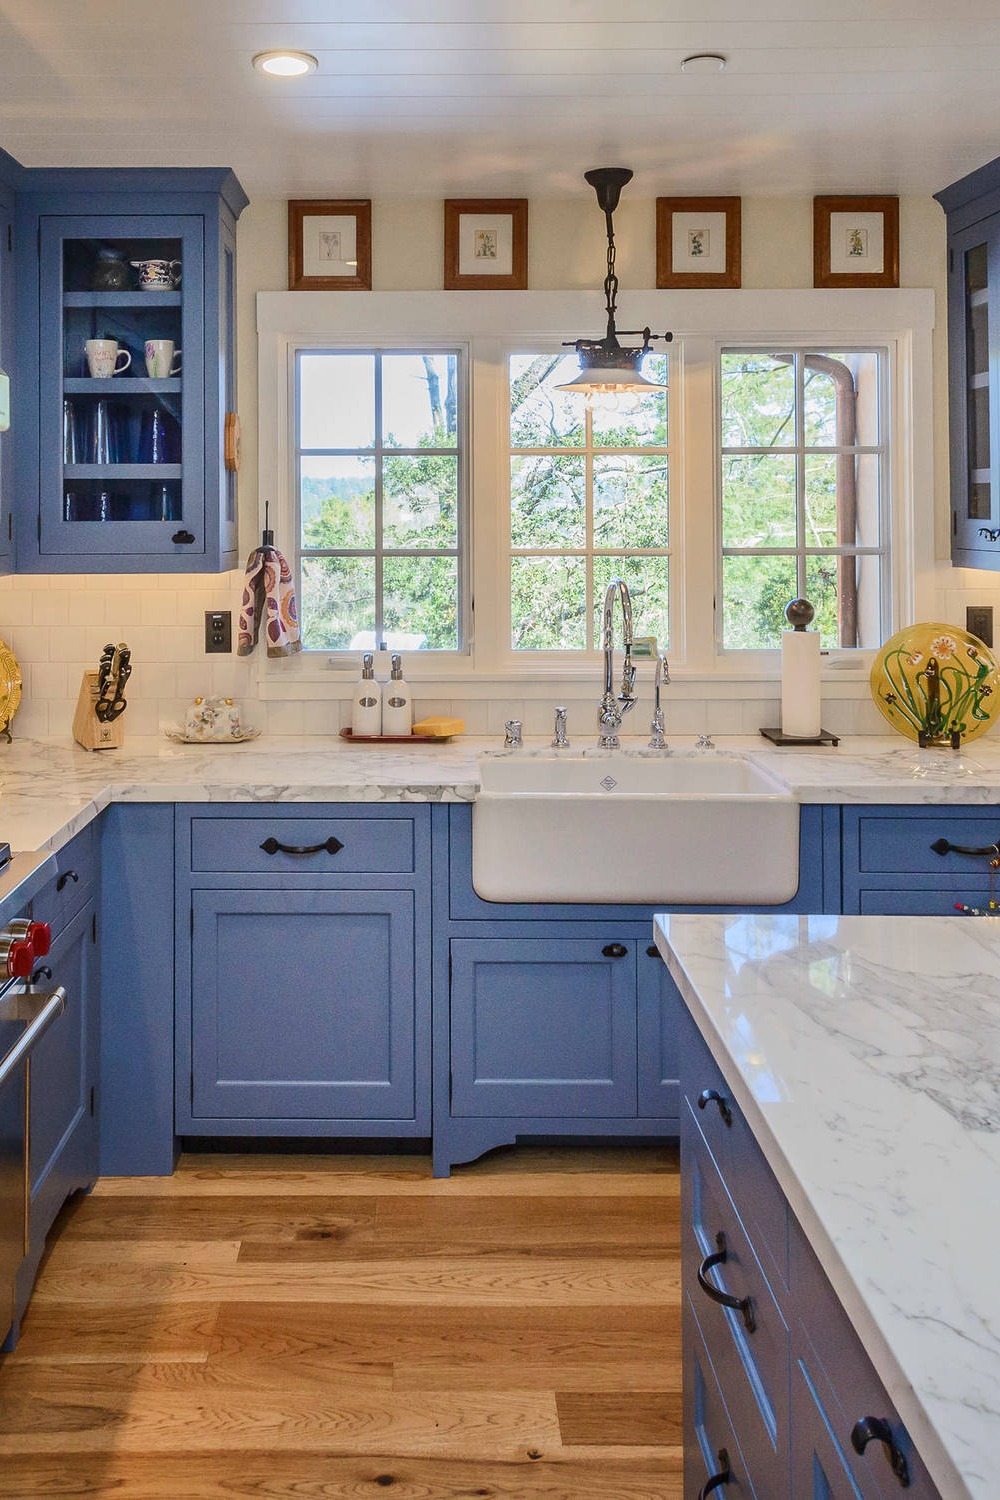 Shaker Blue Cabinets with White Marble Countertops and Tile Backsplash